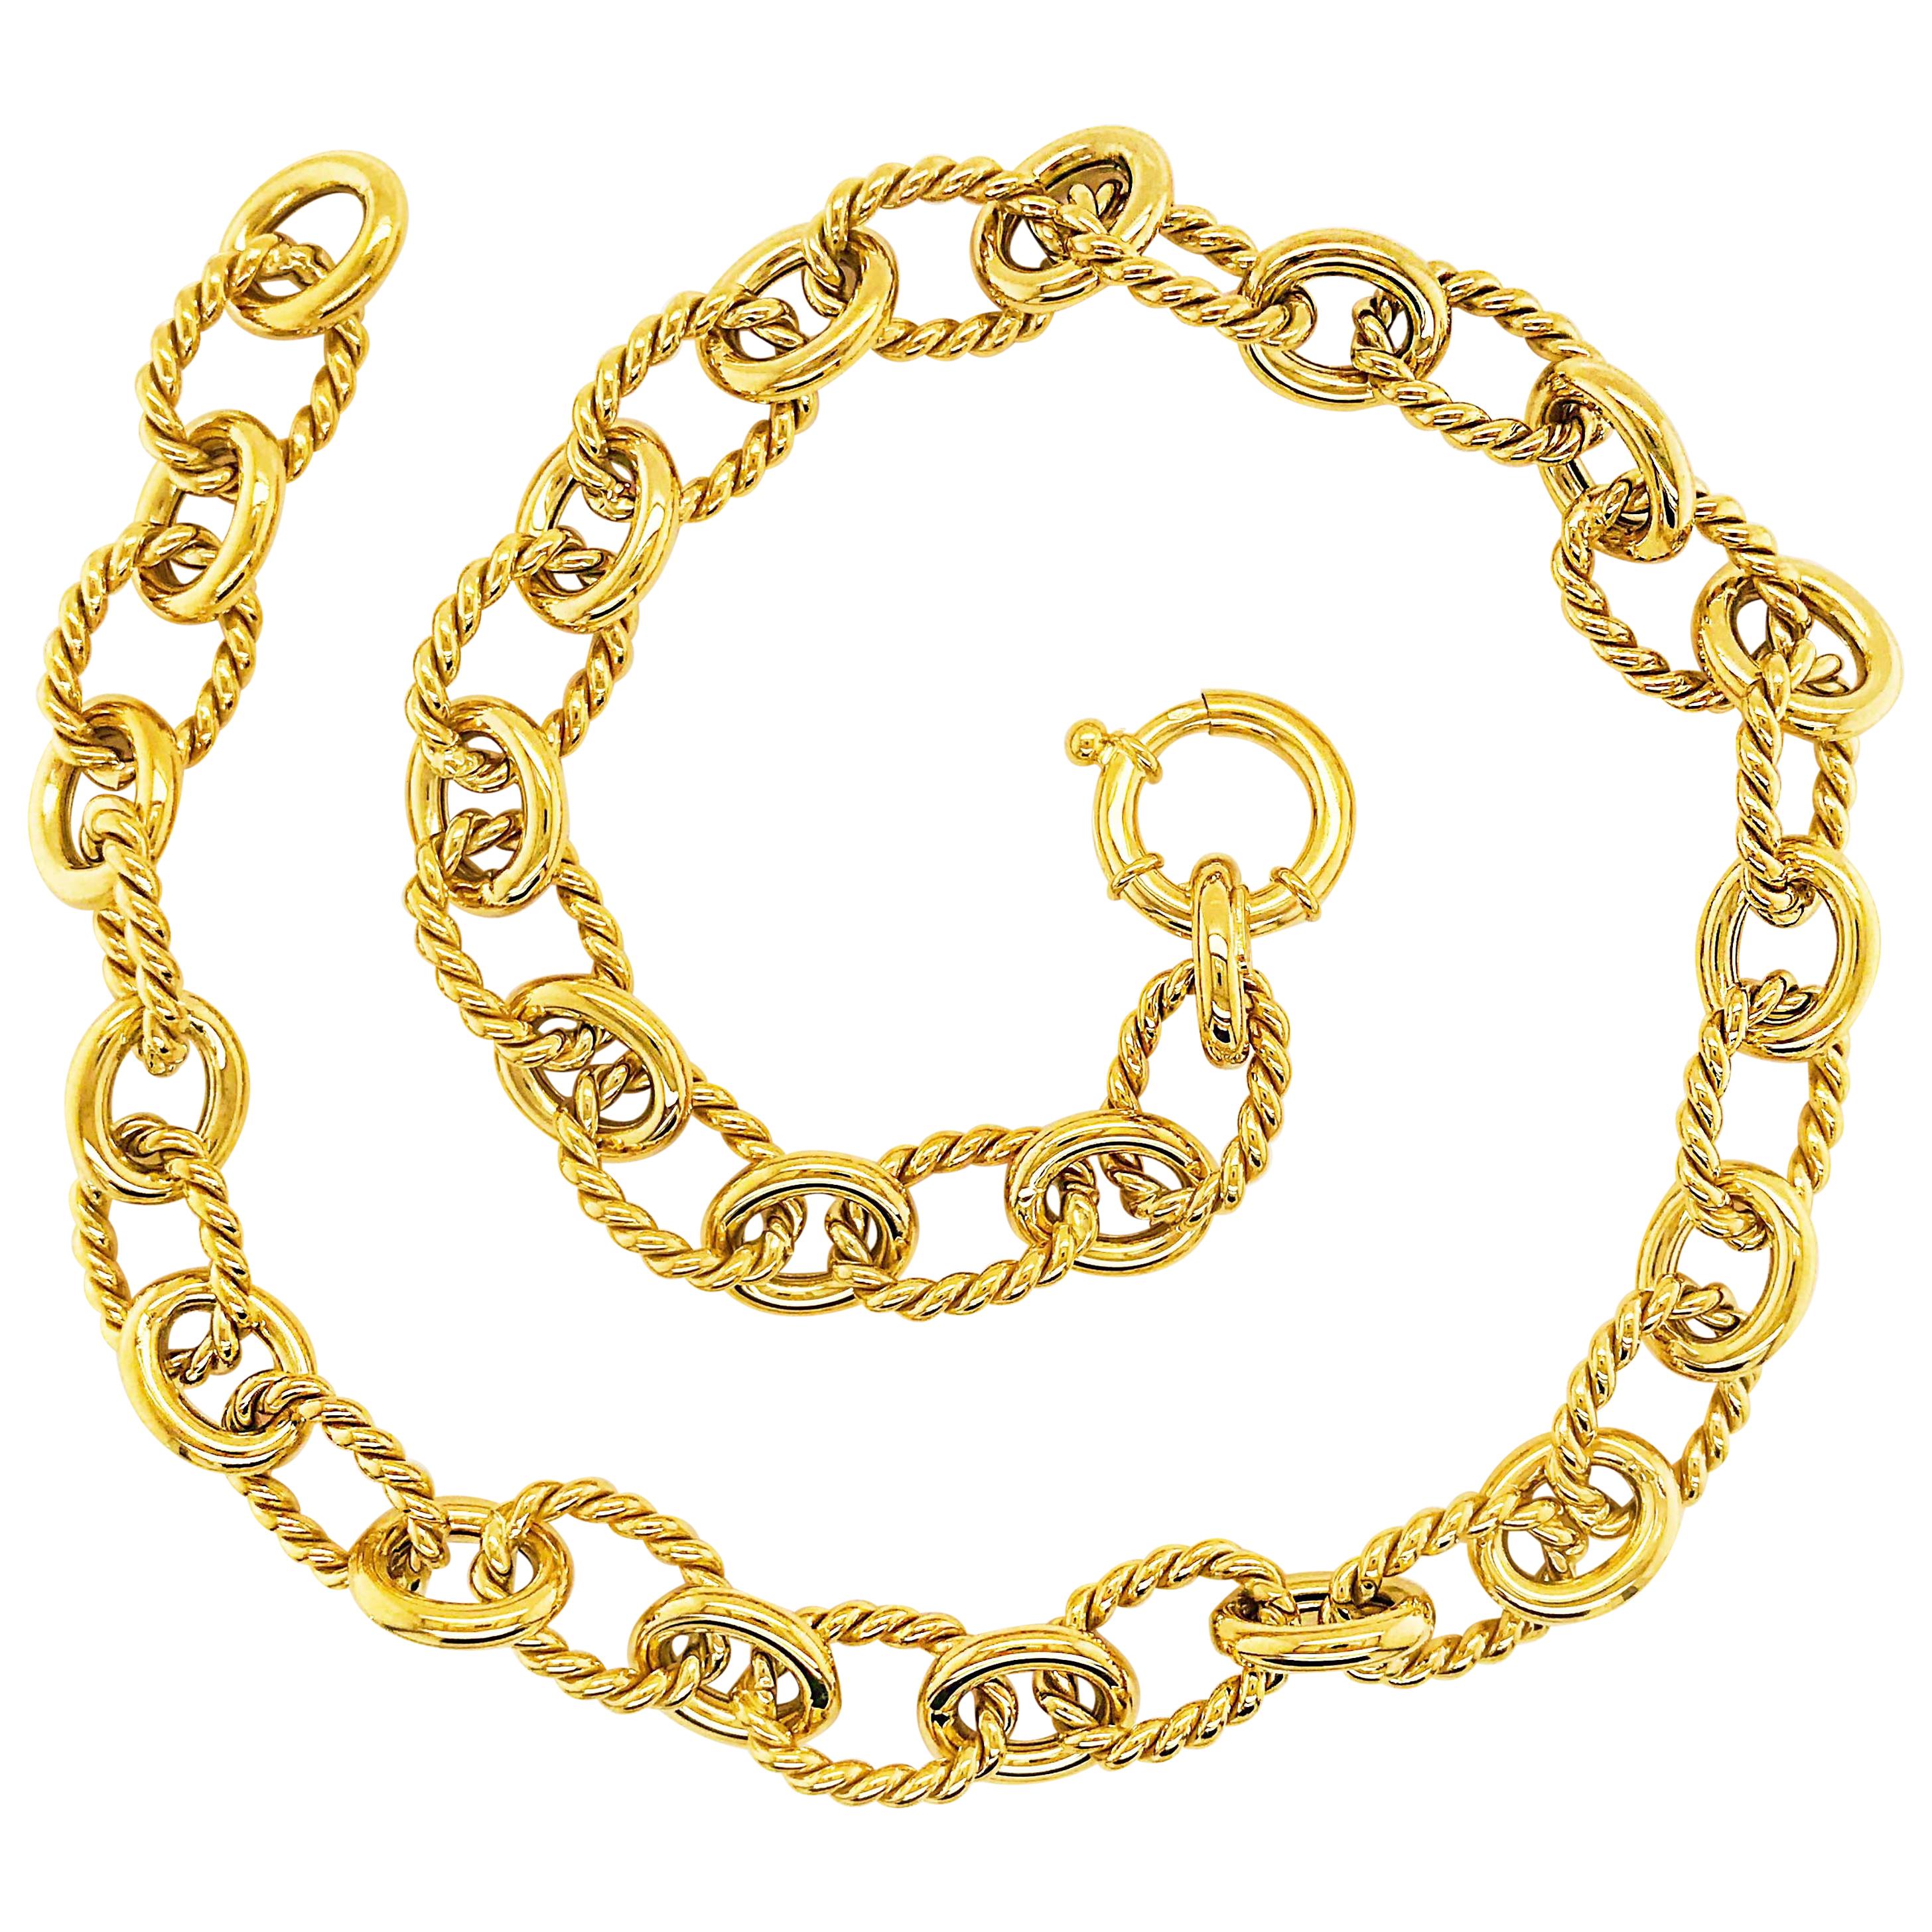 Large Link Chain Necklace 14 Karat Gold and Polished Oval Links-Chain